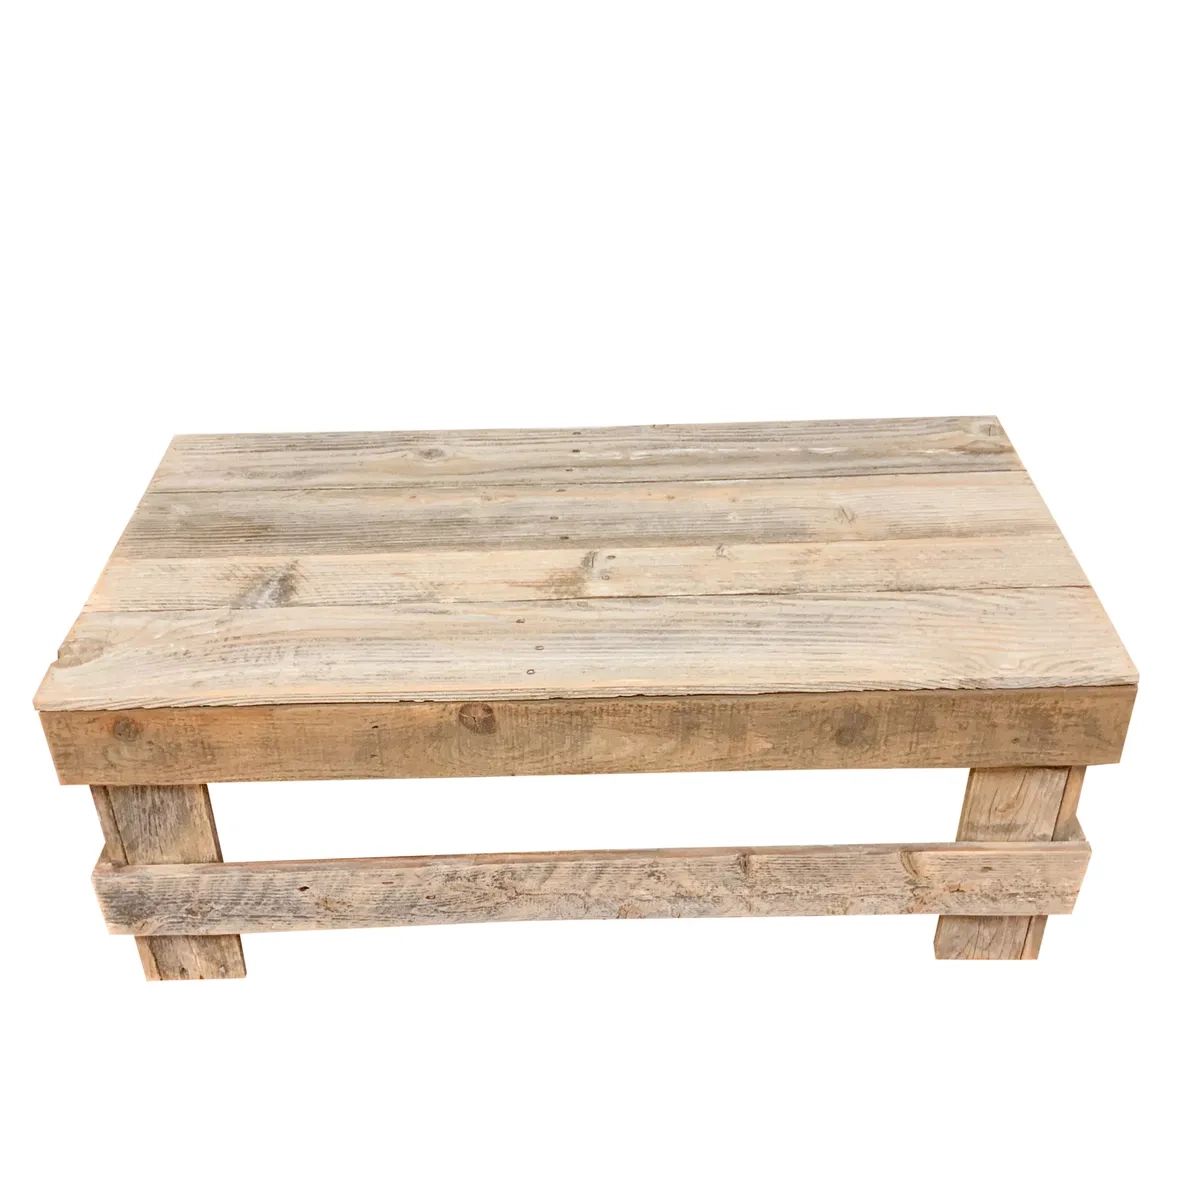 Woven Paths Reclaimed Wood Coffee Table, Natural, Free Shipping | Ebay Inside Woven Paths Coffee Tables (View 7 of 15)